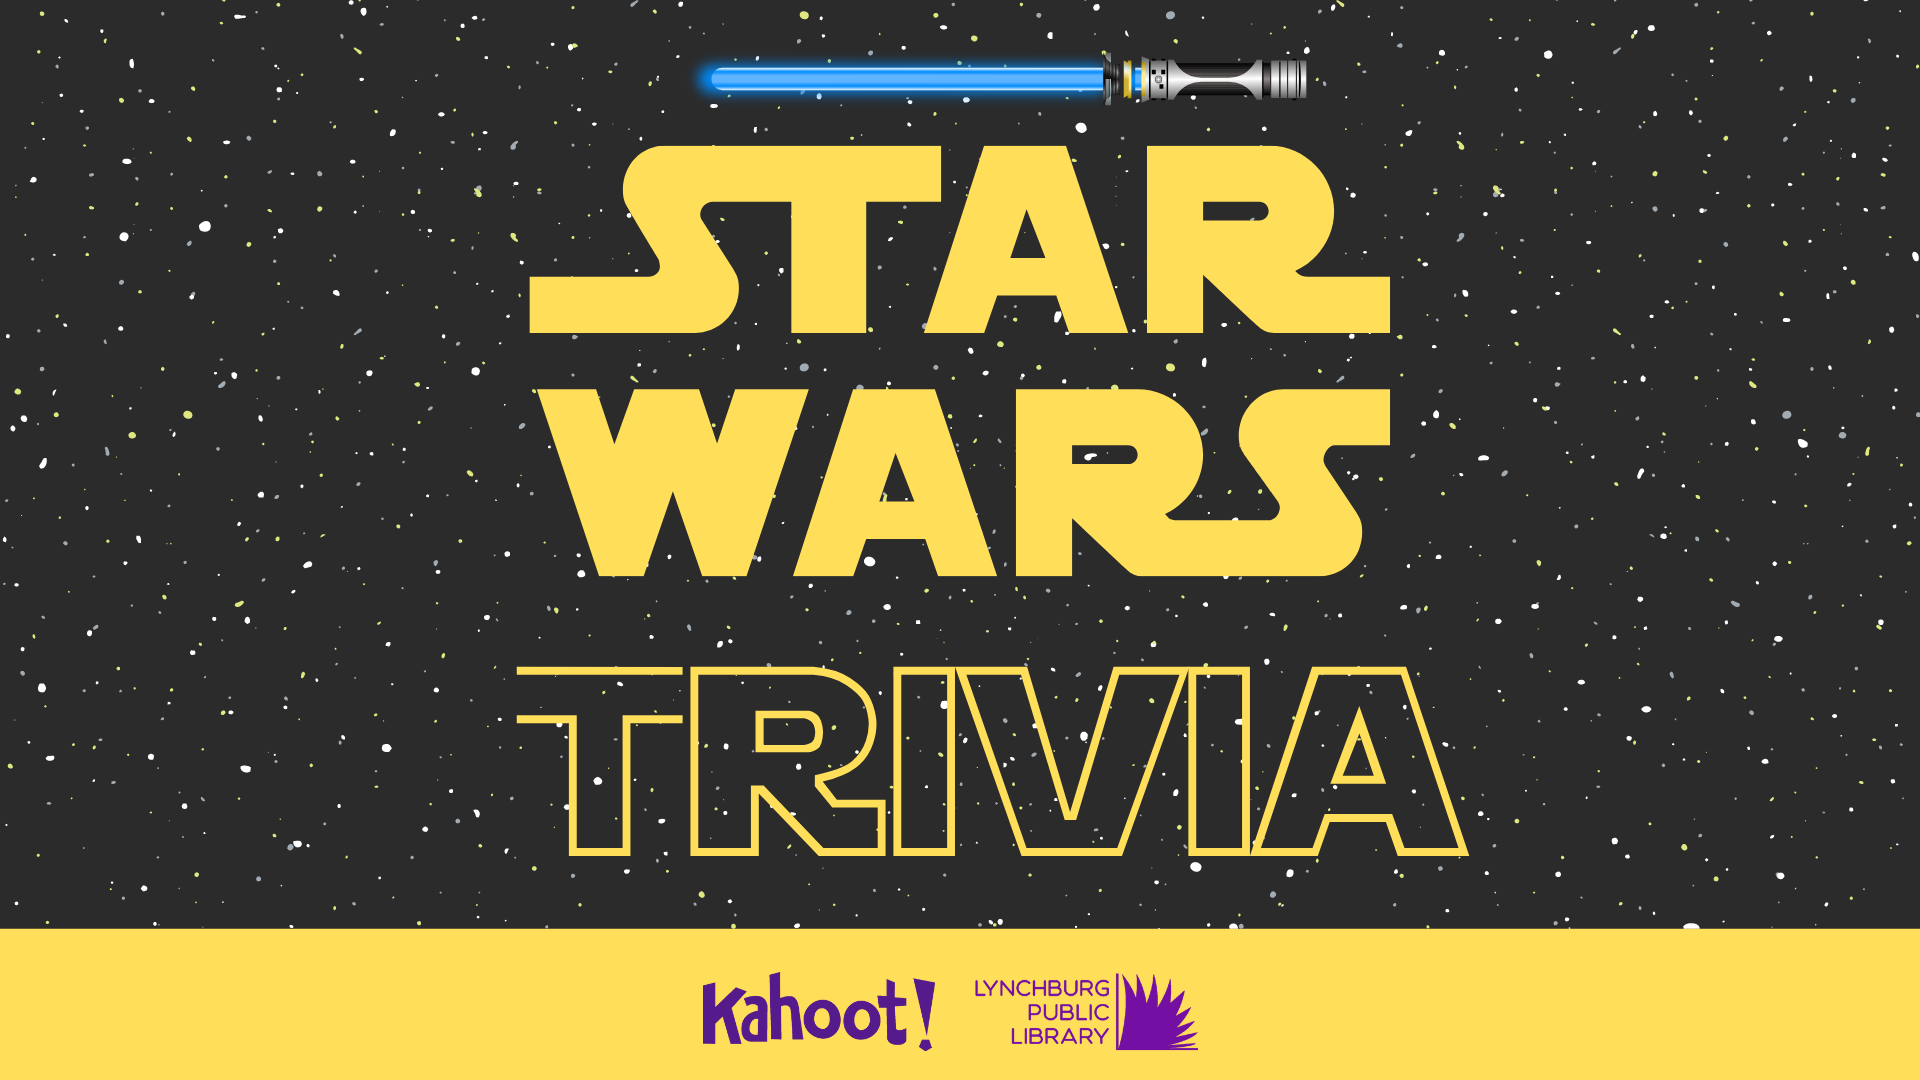 Image features stars and a lightsaber. Text states Star Wars Trivia 